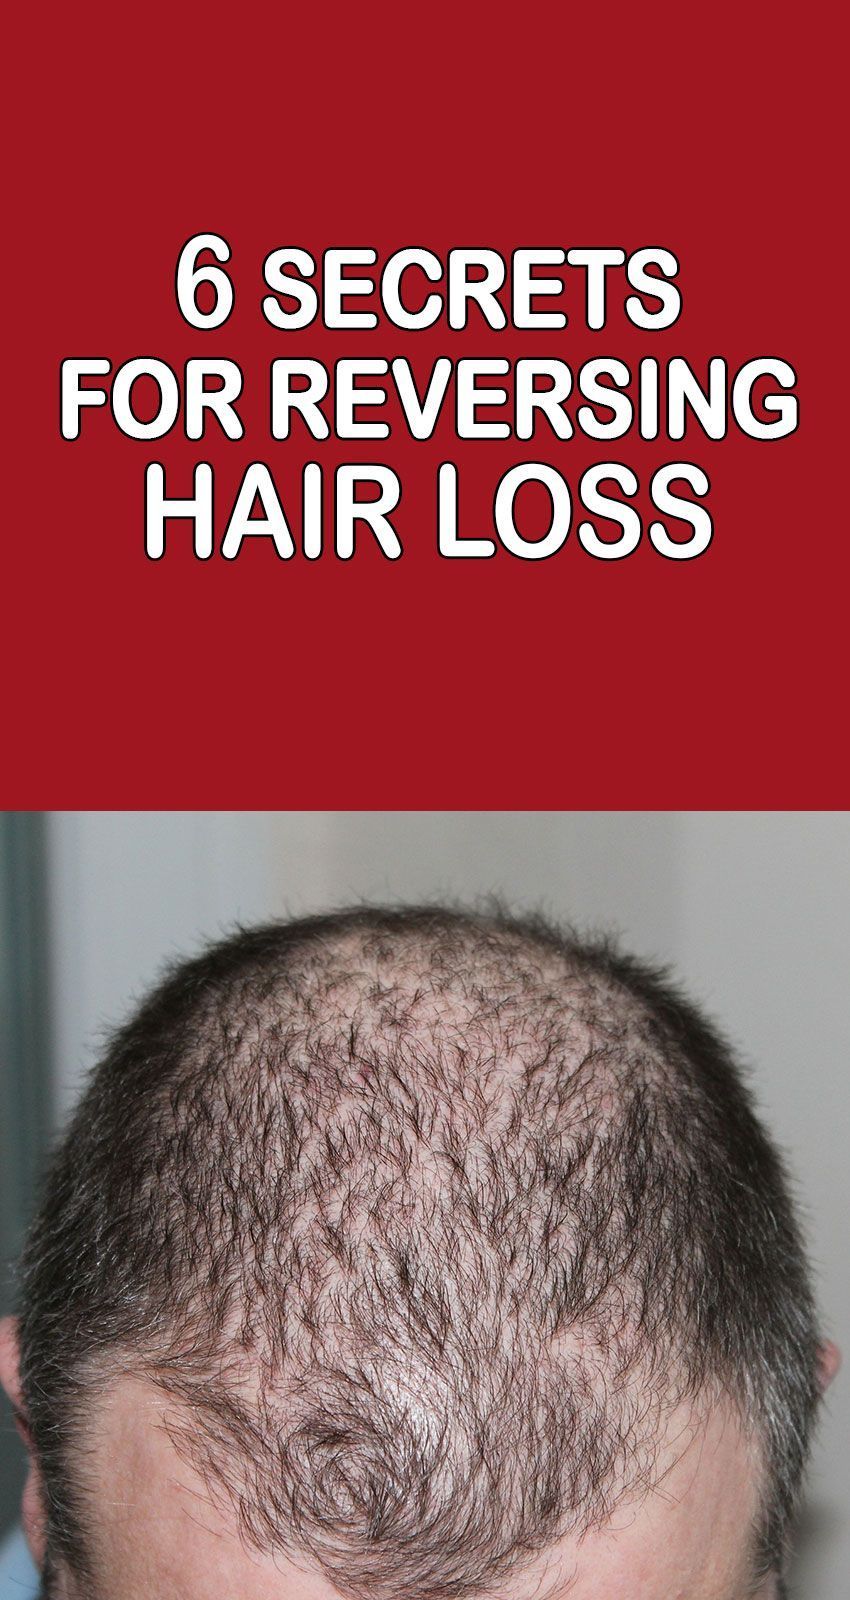 The cause of hair loss is linked to an increase in an androgen hormone ...